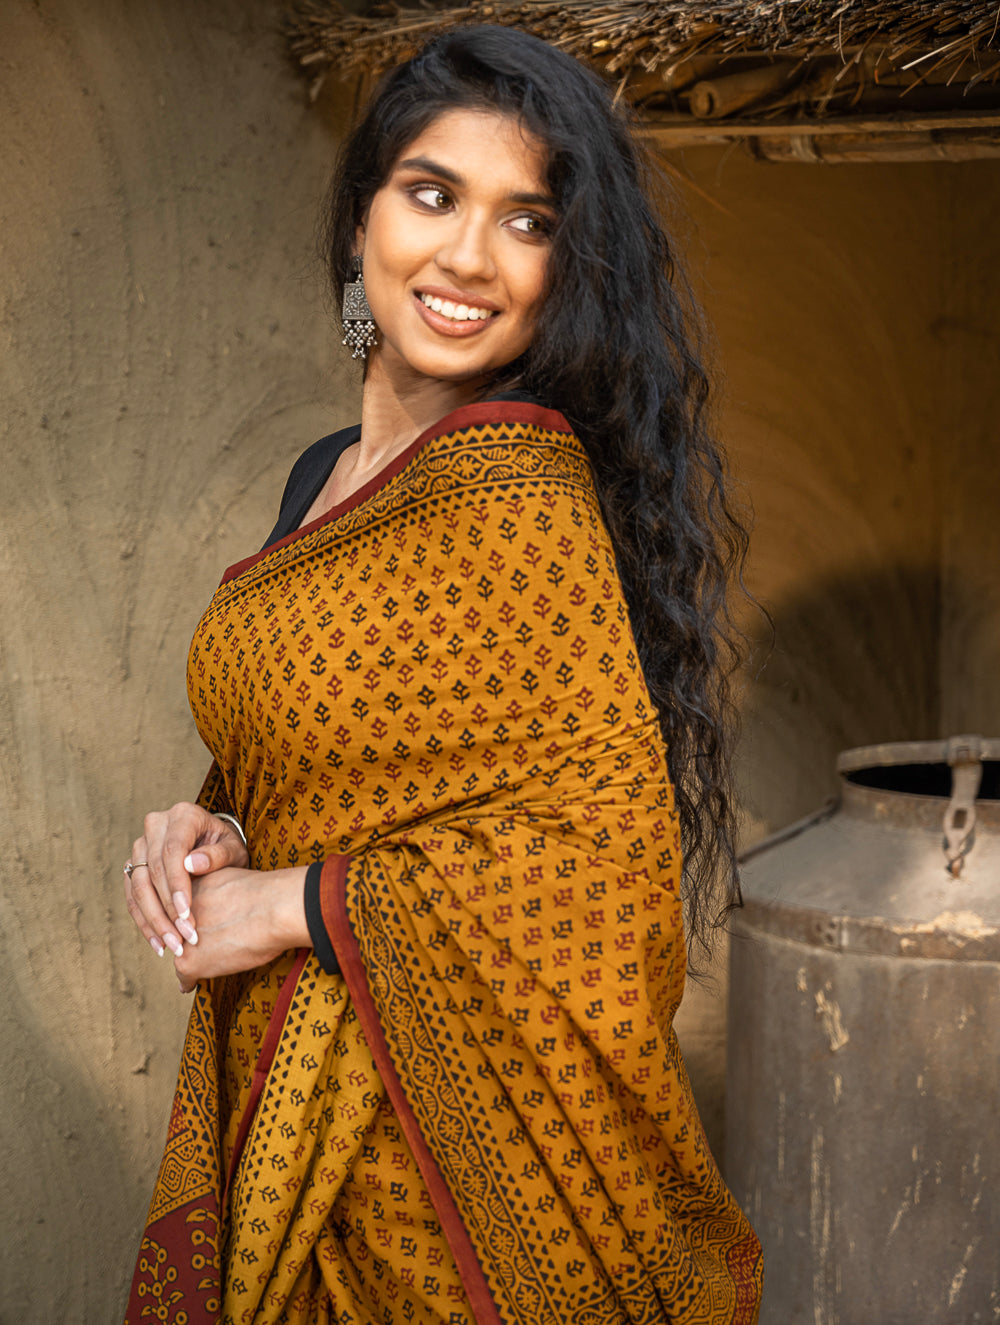 Load image into Gallery viewer, Exclusive Bagh Hand Block Printed Cotton Saree - Floret Medley